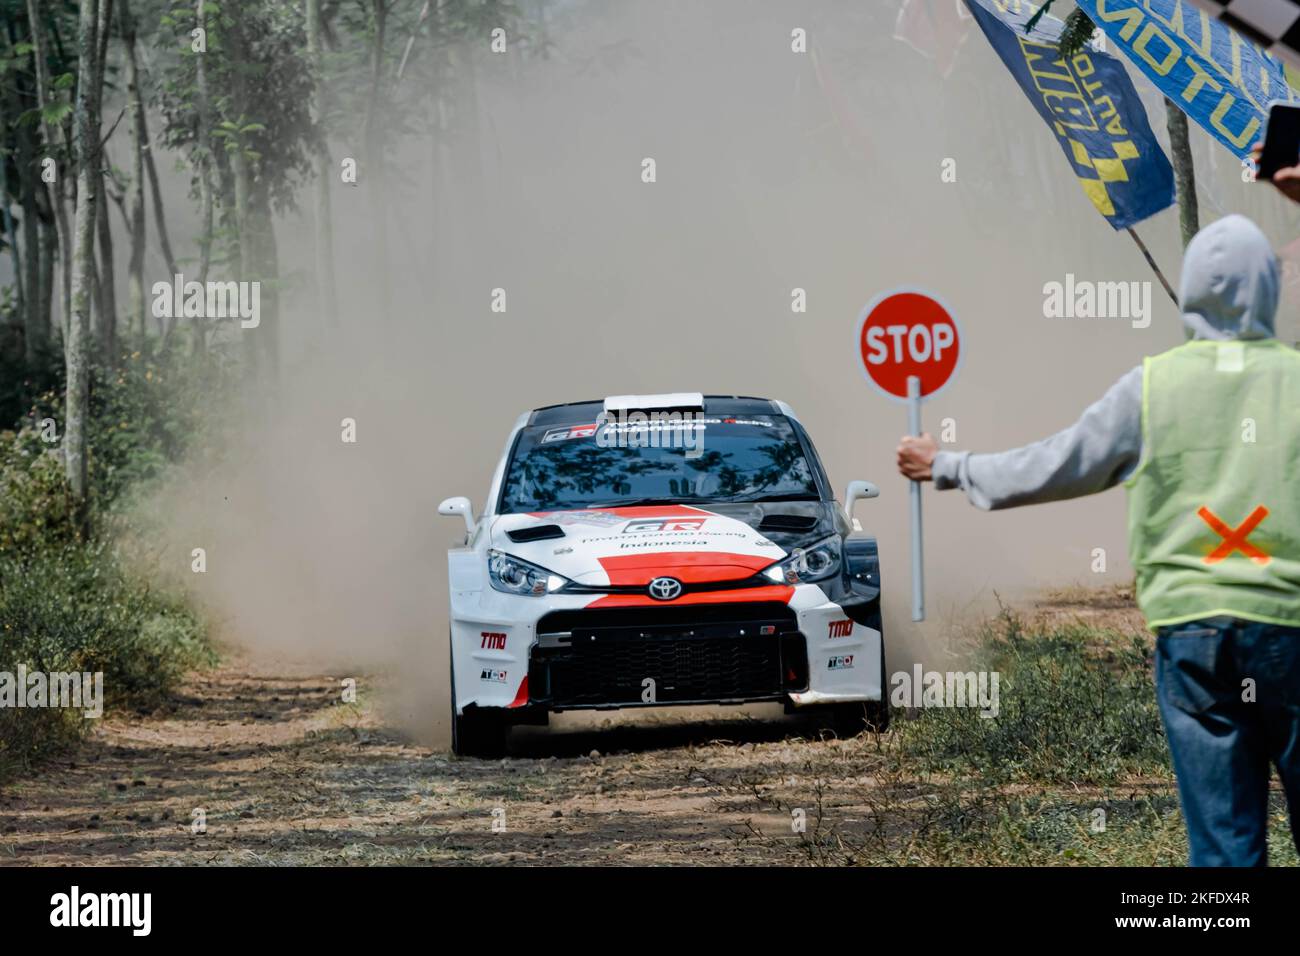 2022 Toyota Yaris GR being stopped at the Kejurnas Sprint Rally 2022 in Puslatker AL Bedali circuit, Lawang, East Java, Indonesia Stock Photo